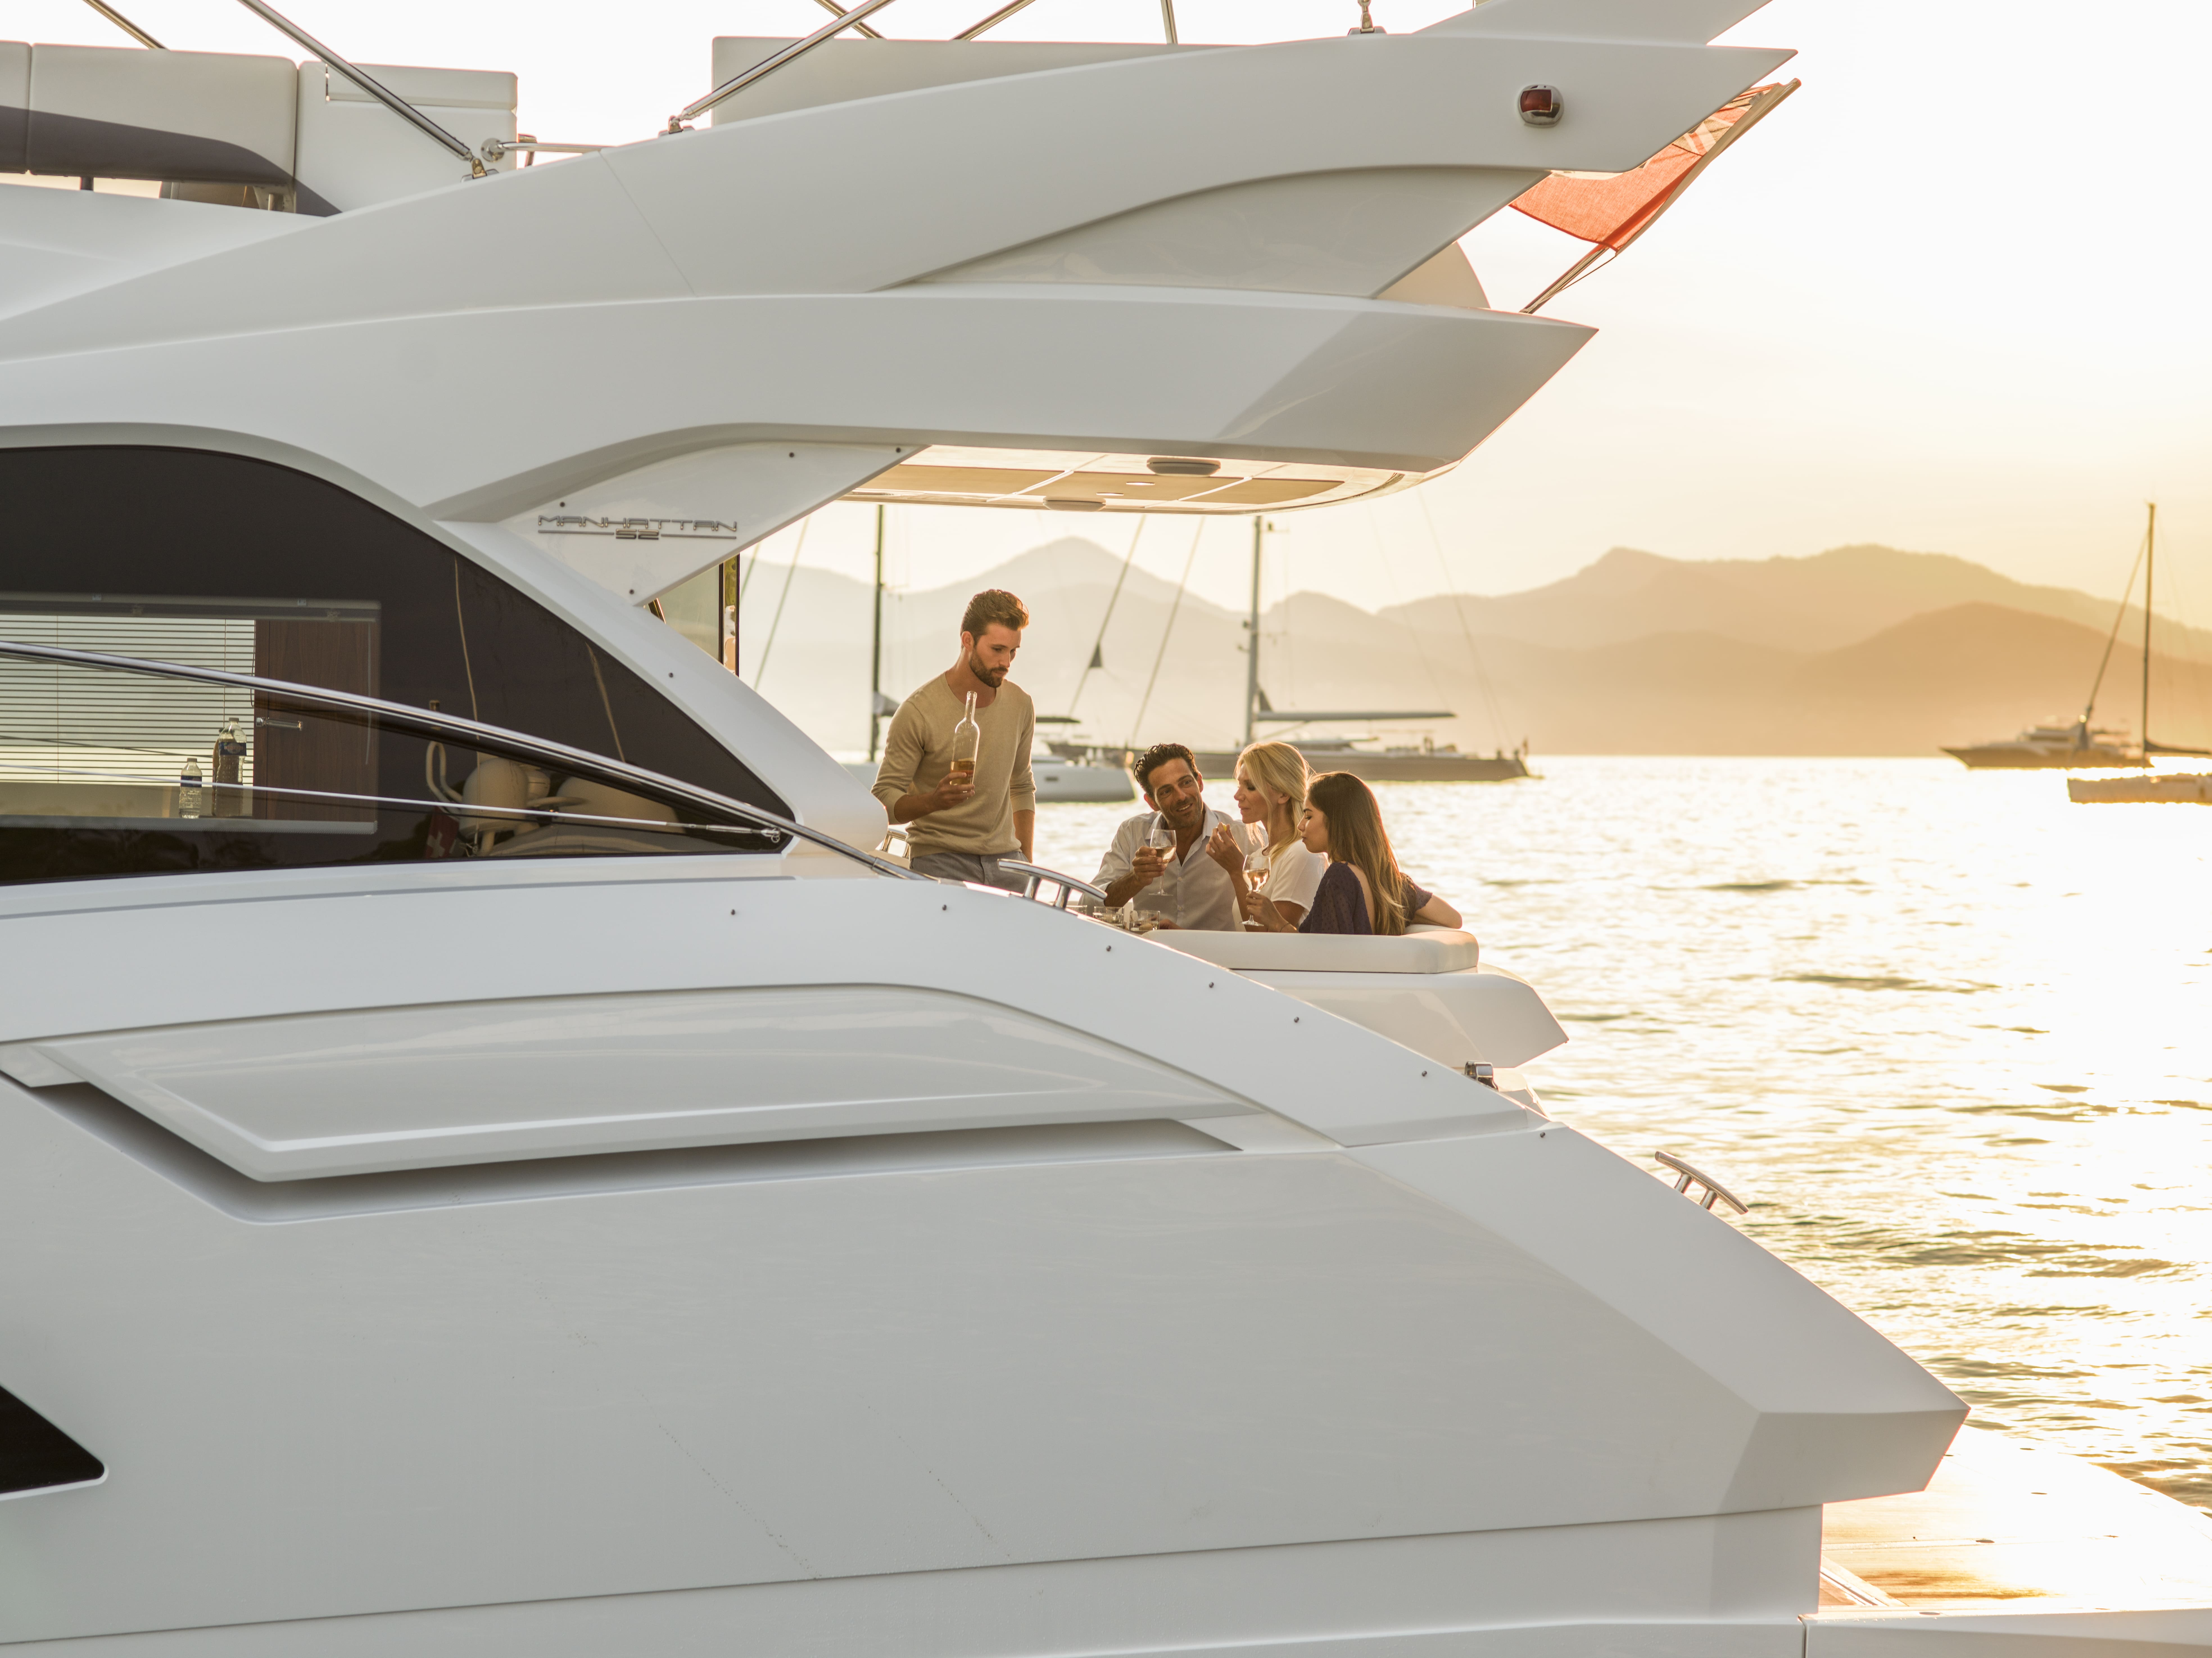 Four people relaxing on the rear deck of a yacht at sunset in a marina